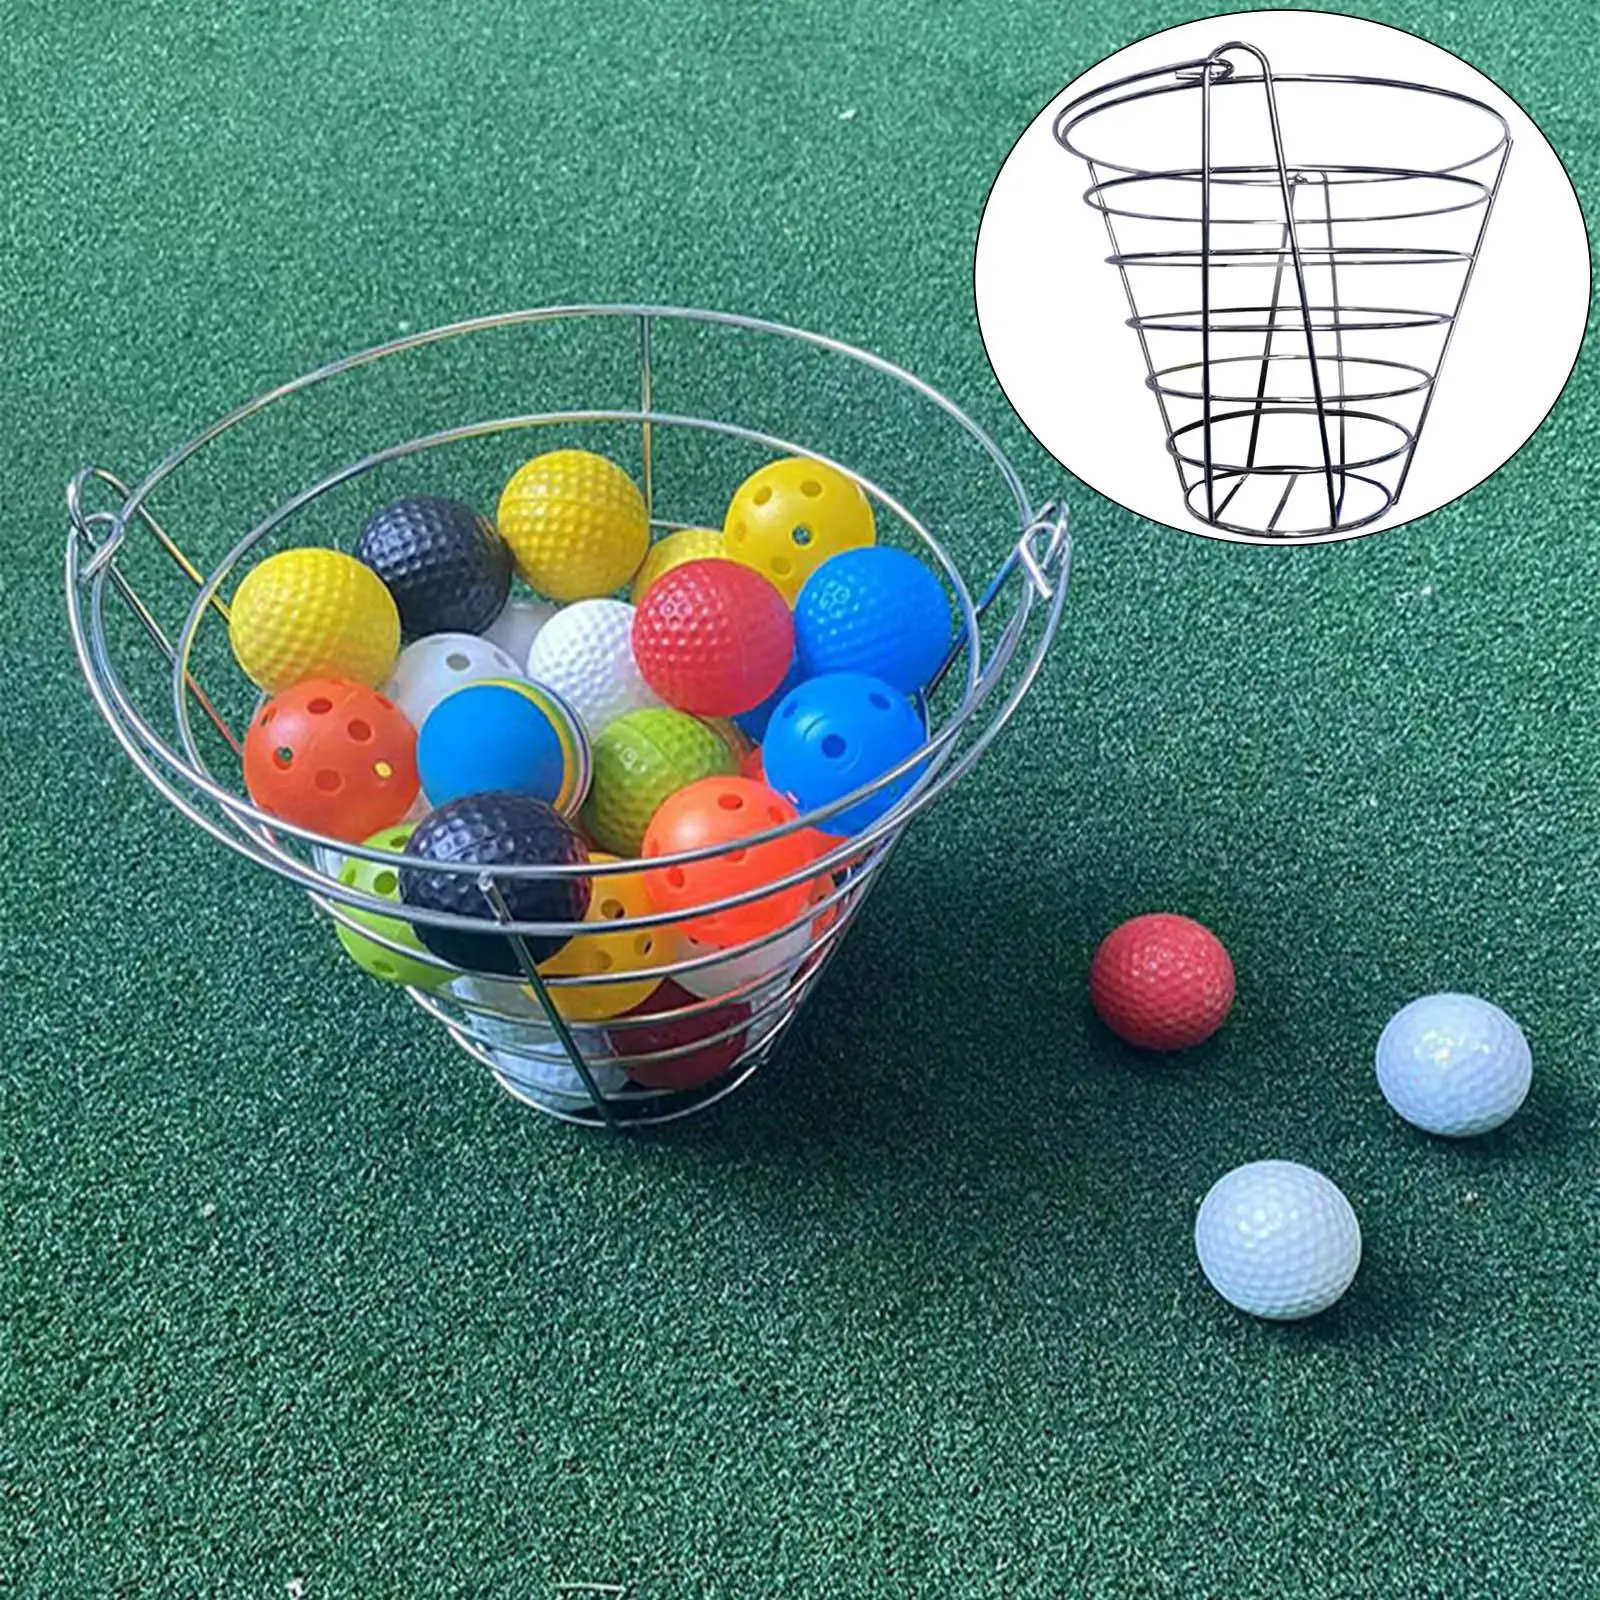 Portable Golf Ball Basket Ball Bucket with Handle Stadium Accessories Backyard Outdoor Outside Sports Holds Contain 50 Balls